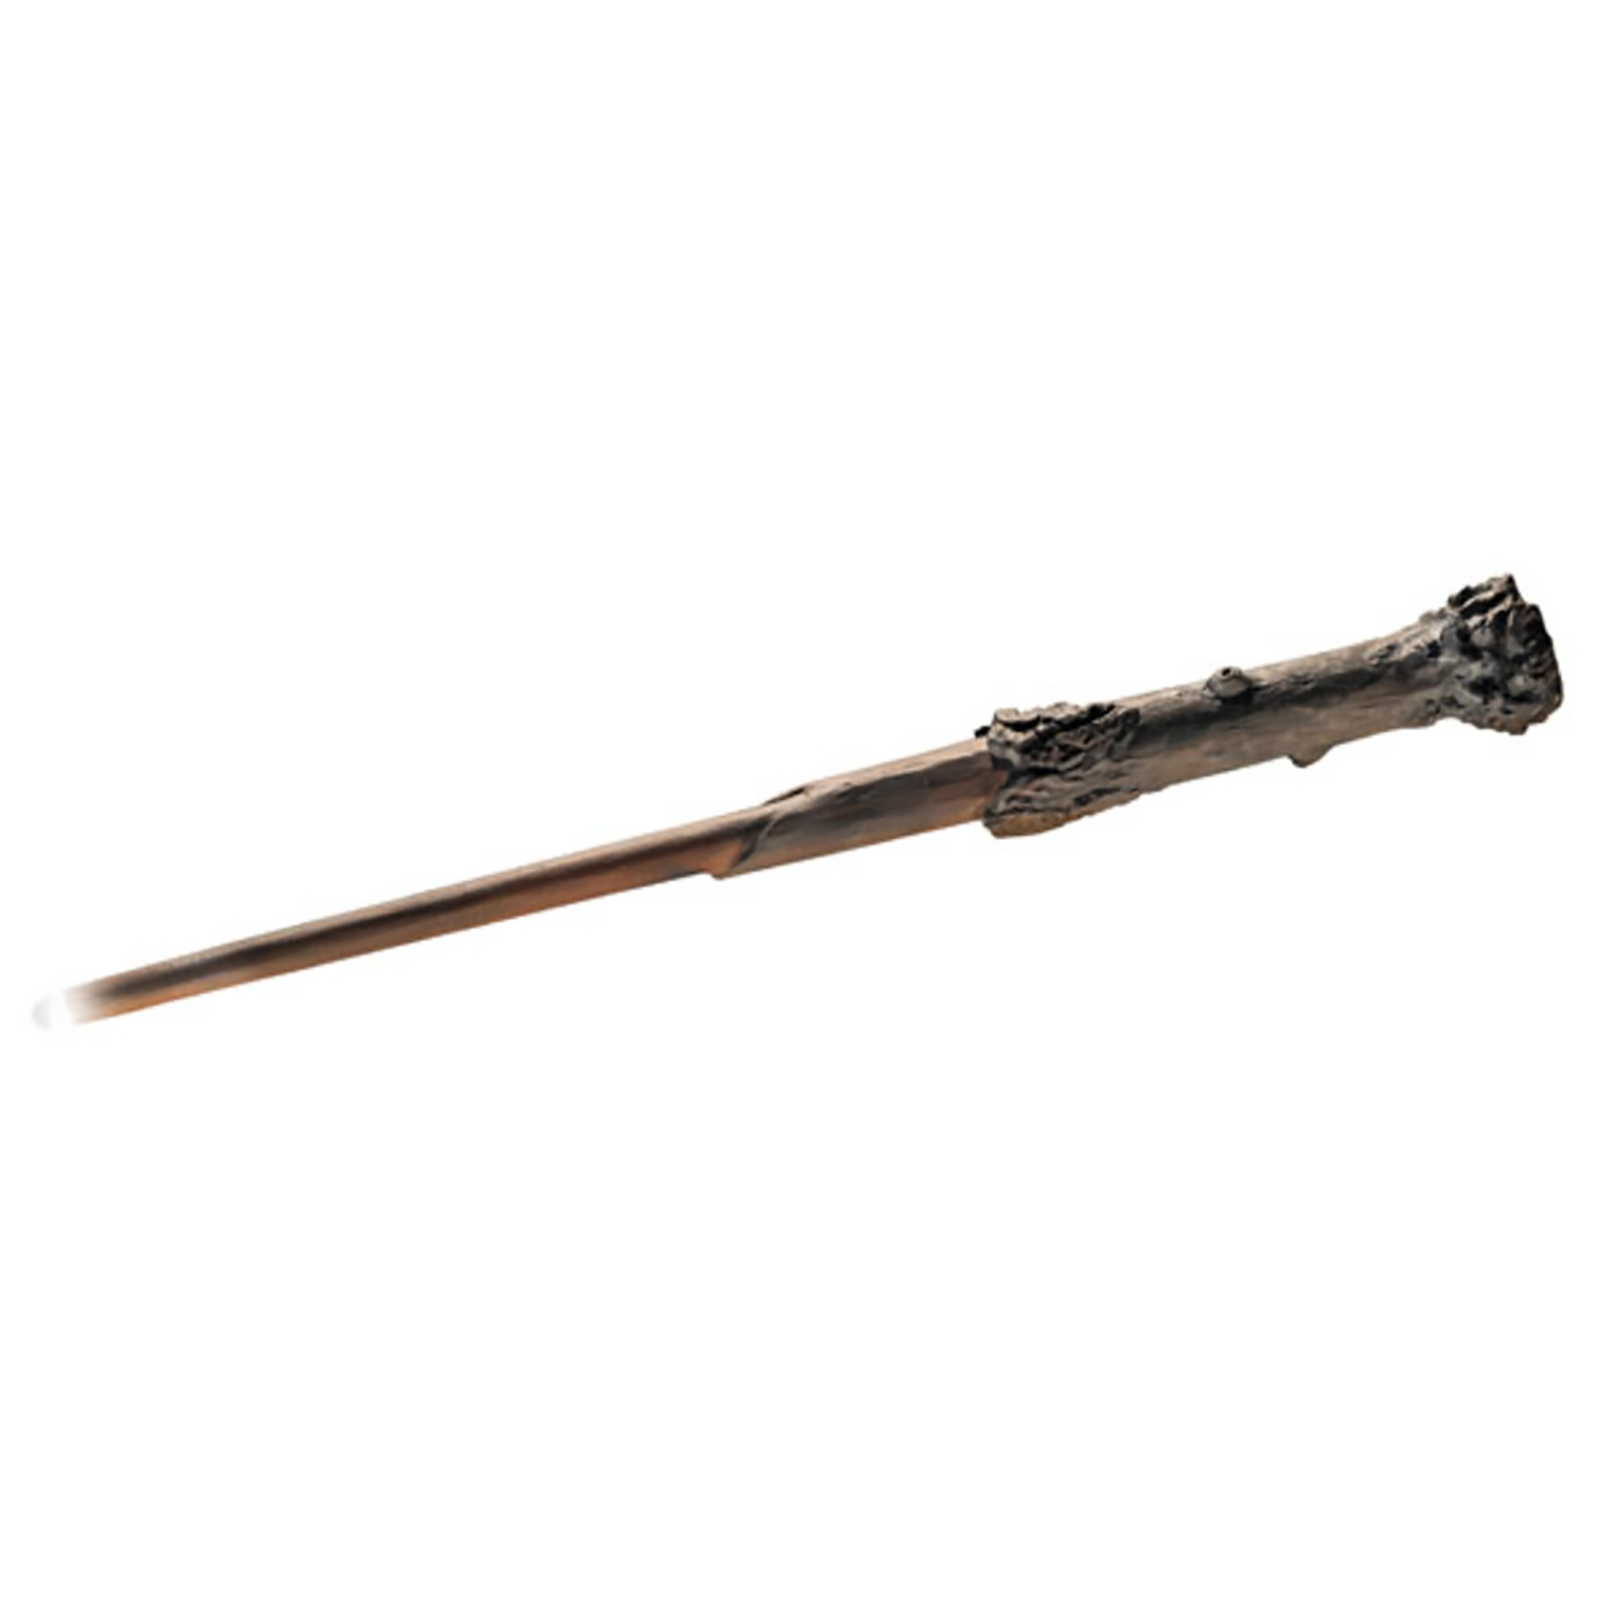 Image showing the wand